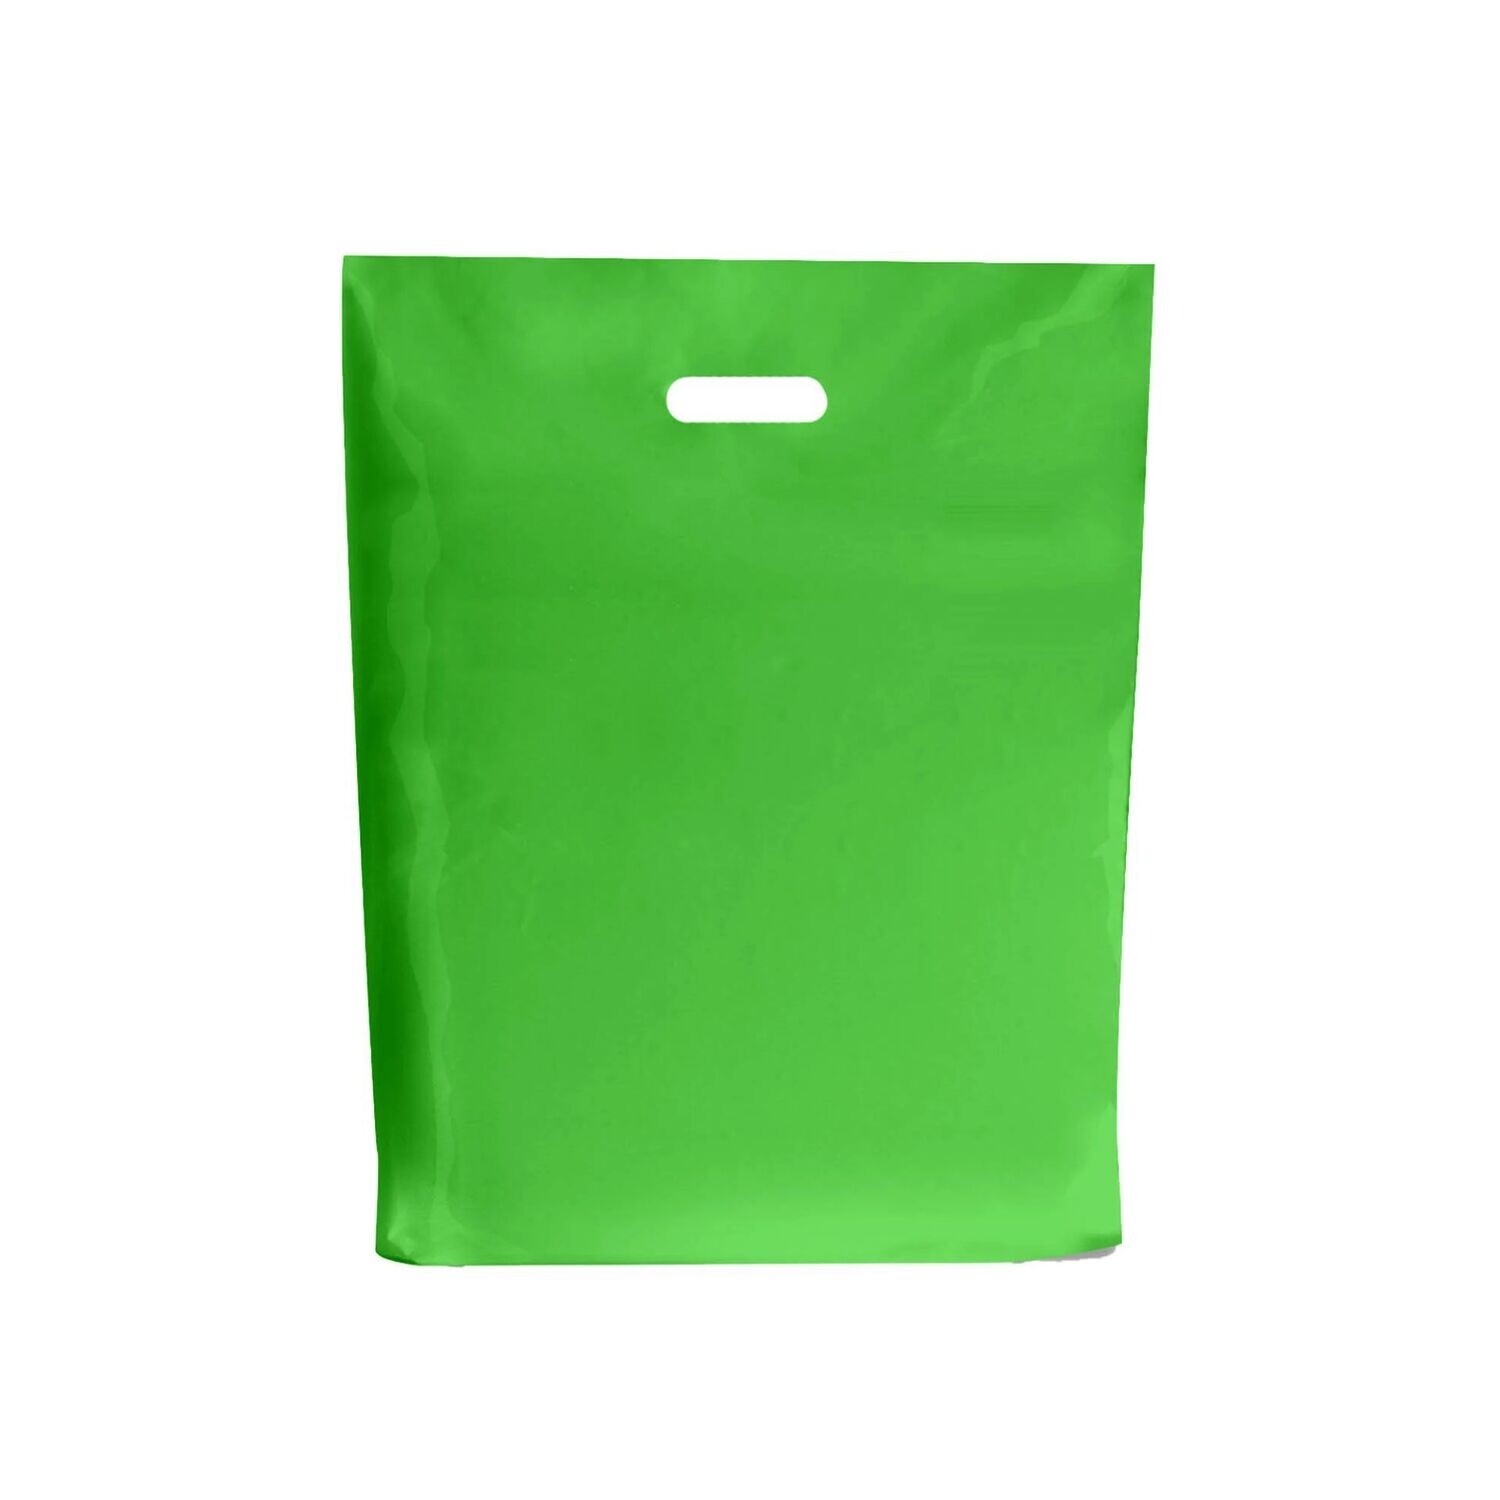 Apple Green Fashion Carrier Bags